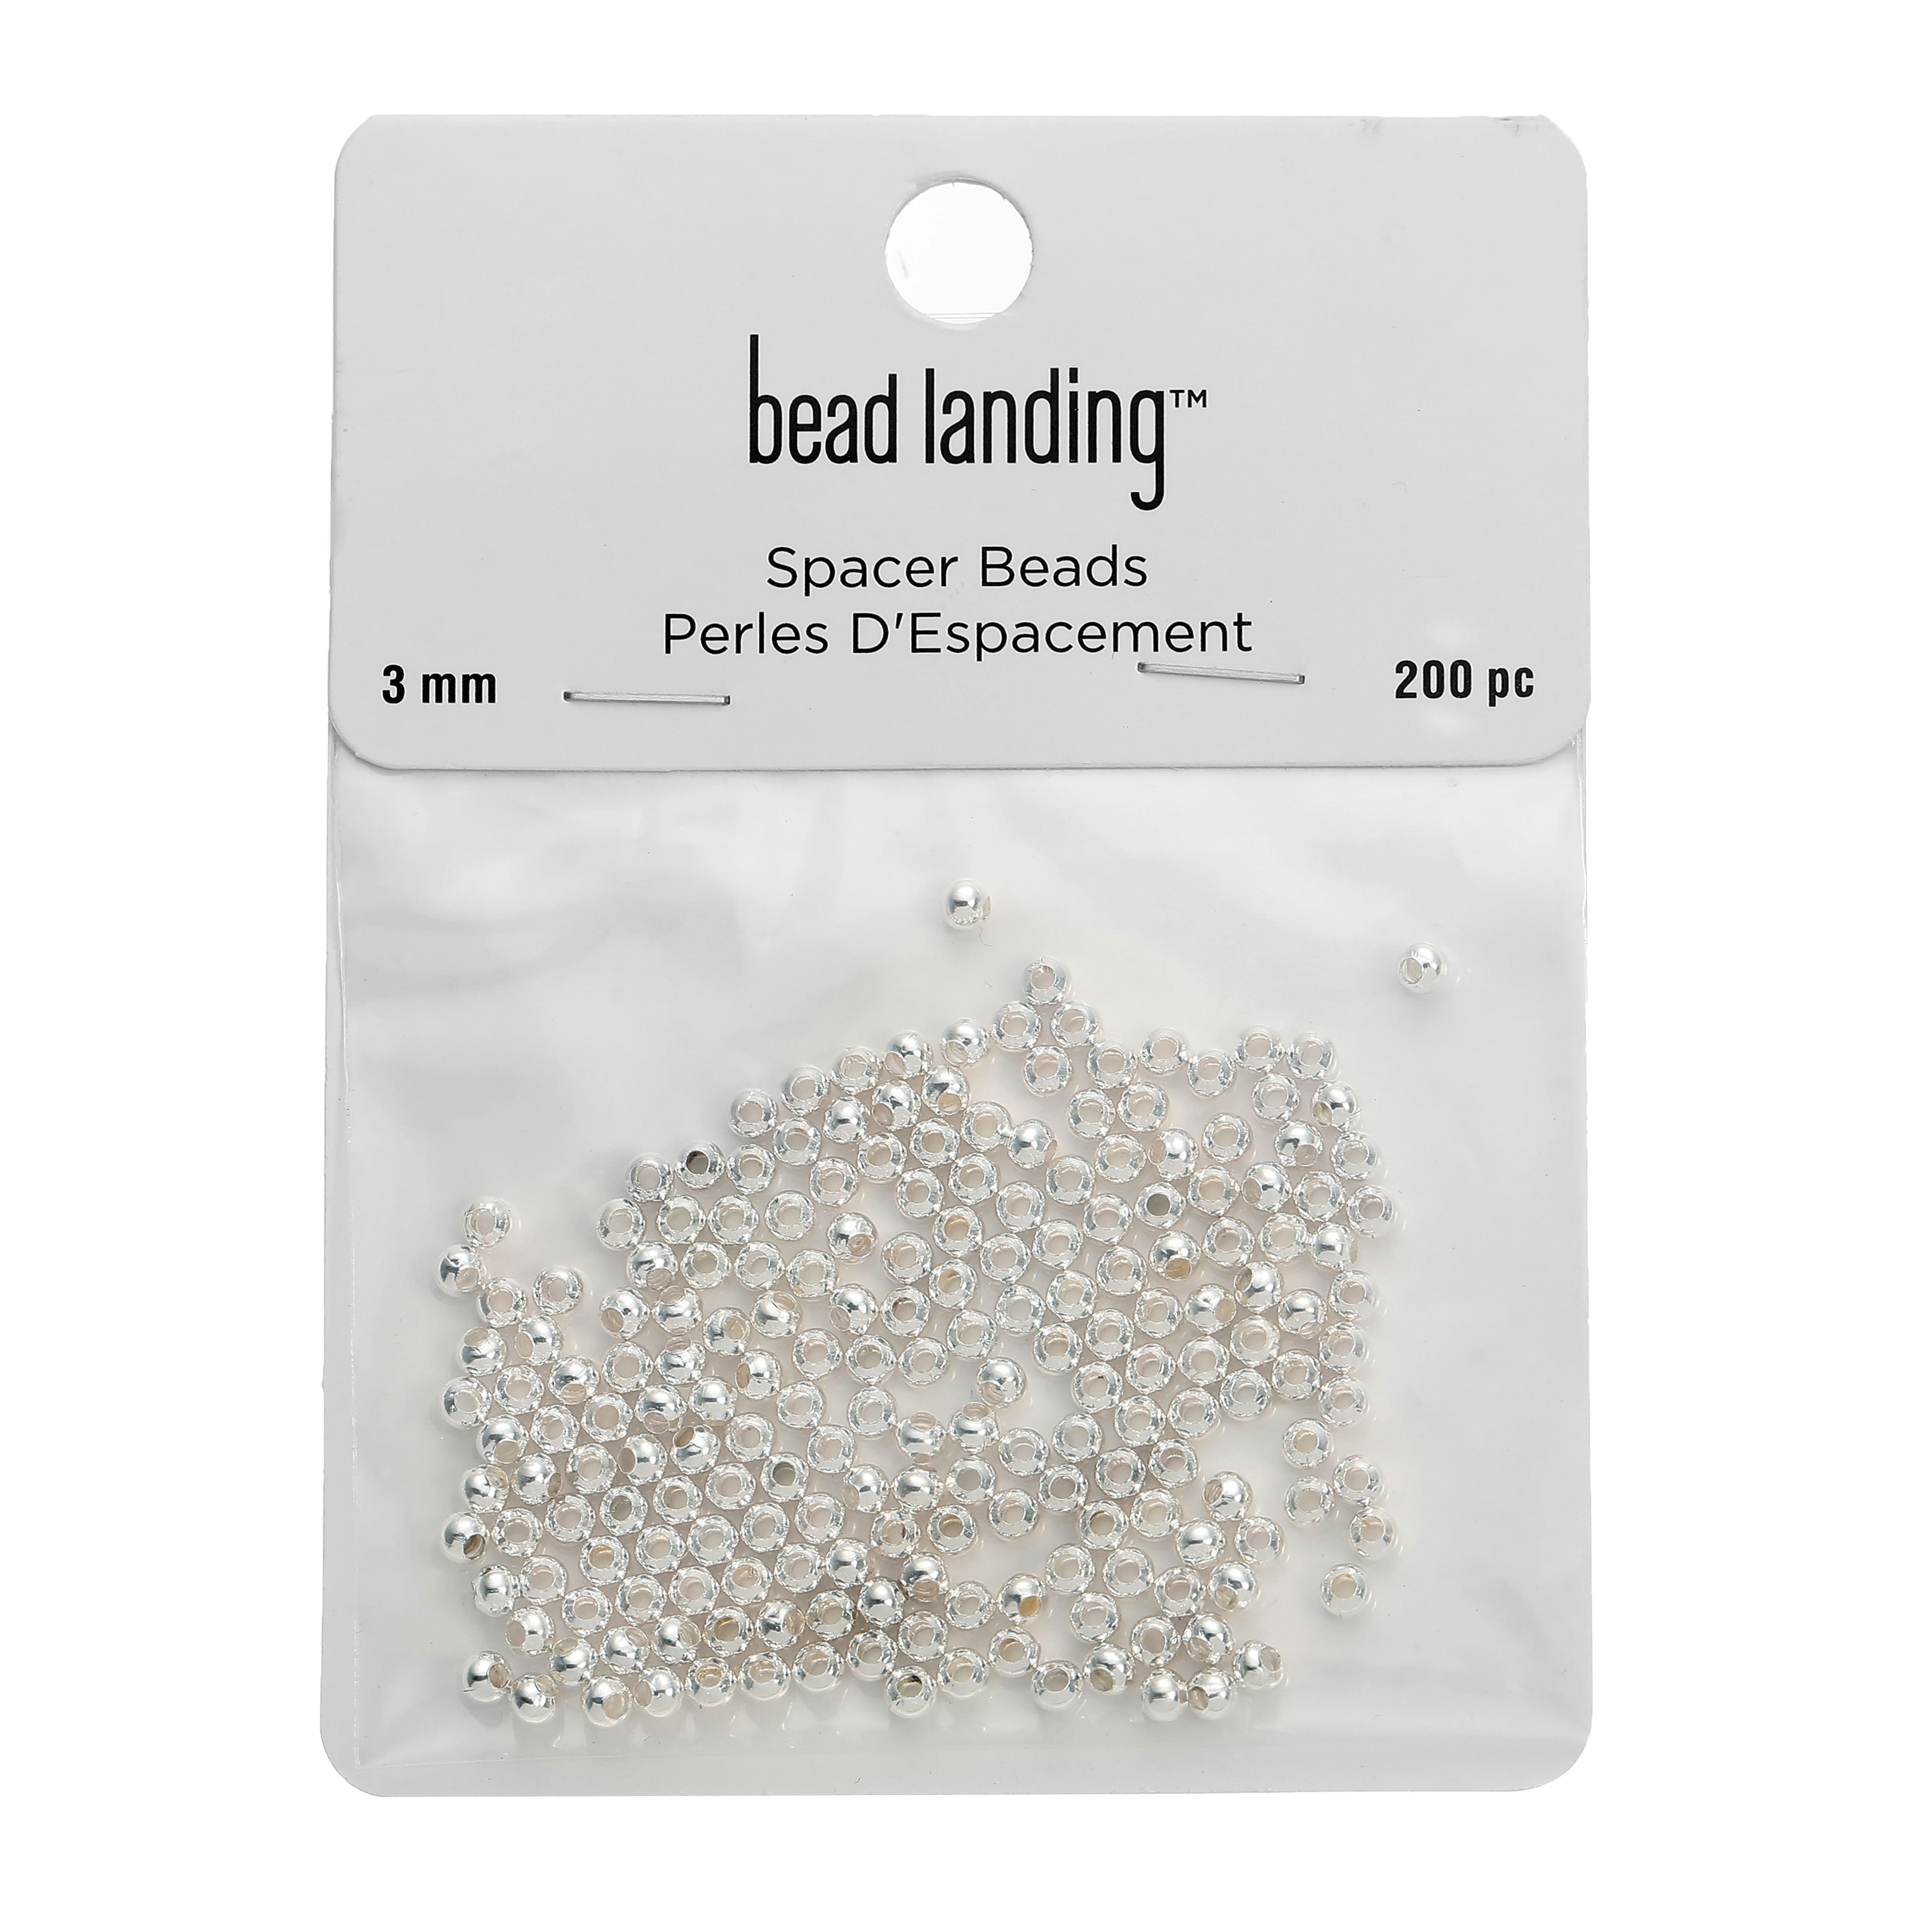 12 Packs: 200 ct. (2,400 total) 3mm Spacer Beads by Bead Landing&#x2122;